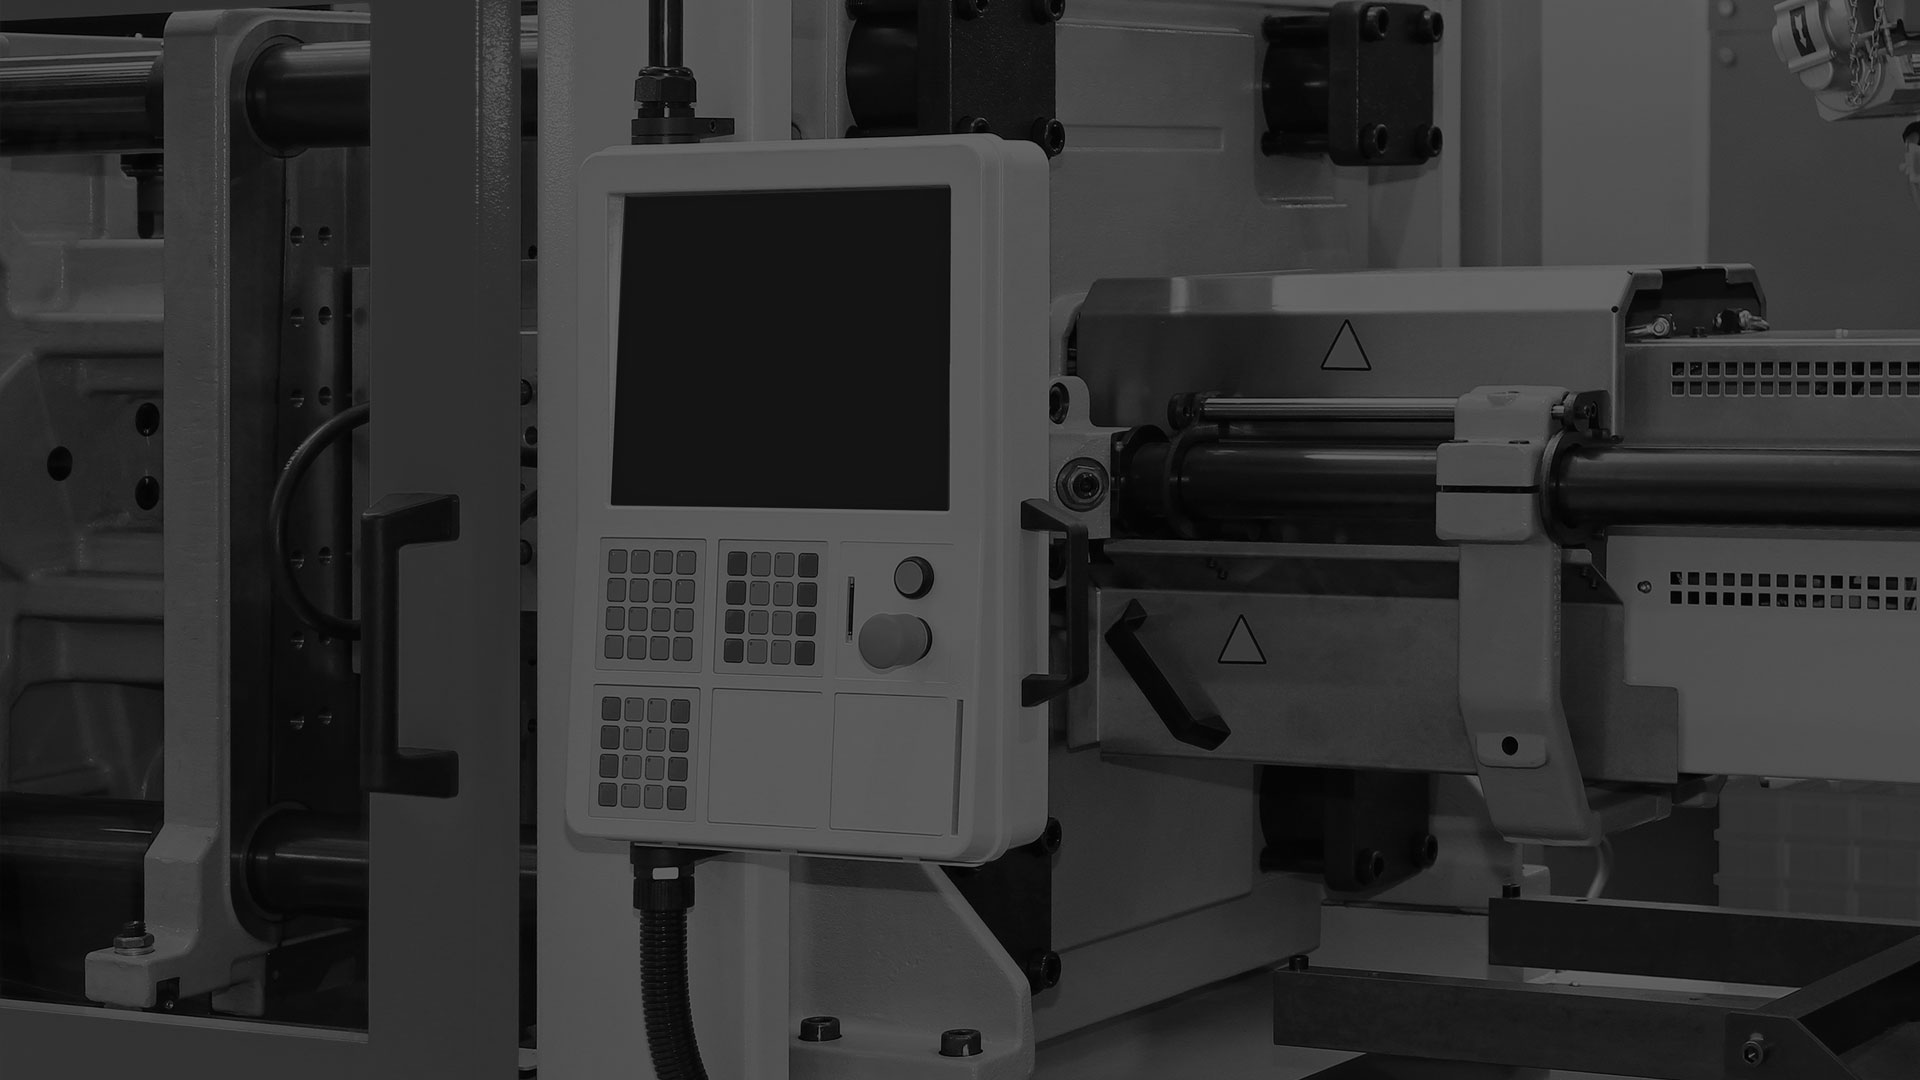 A darkened black and white image of an injection molding machine.